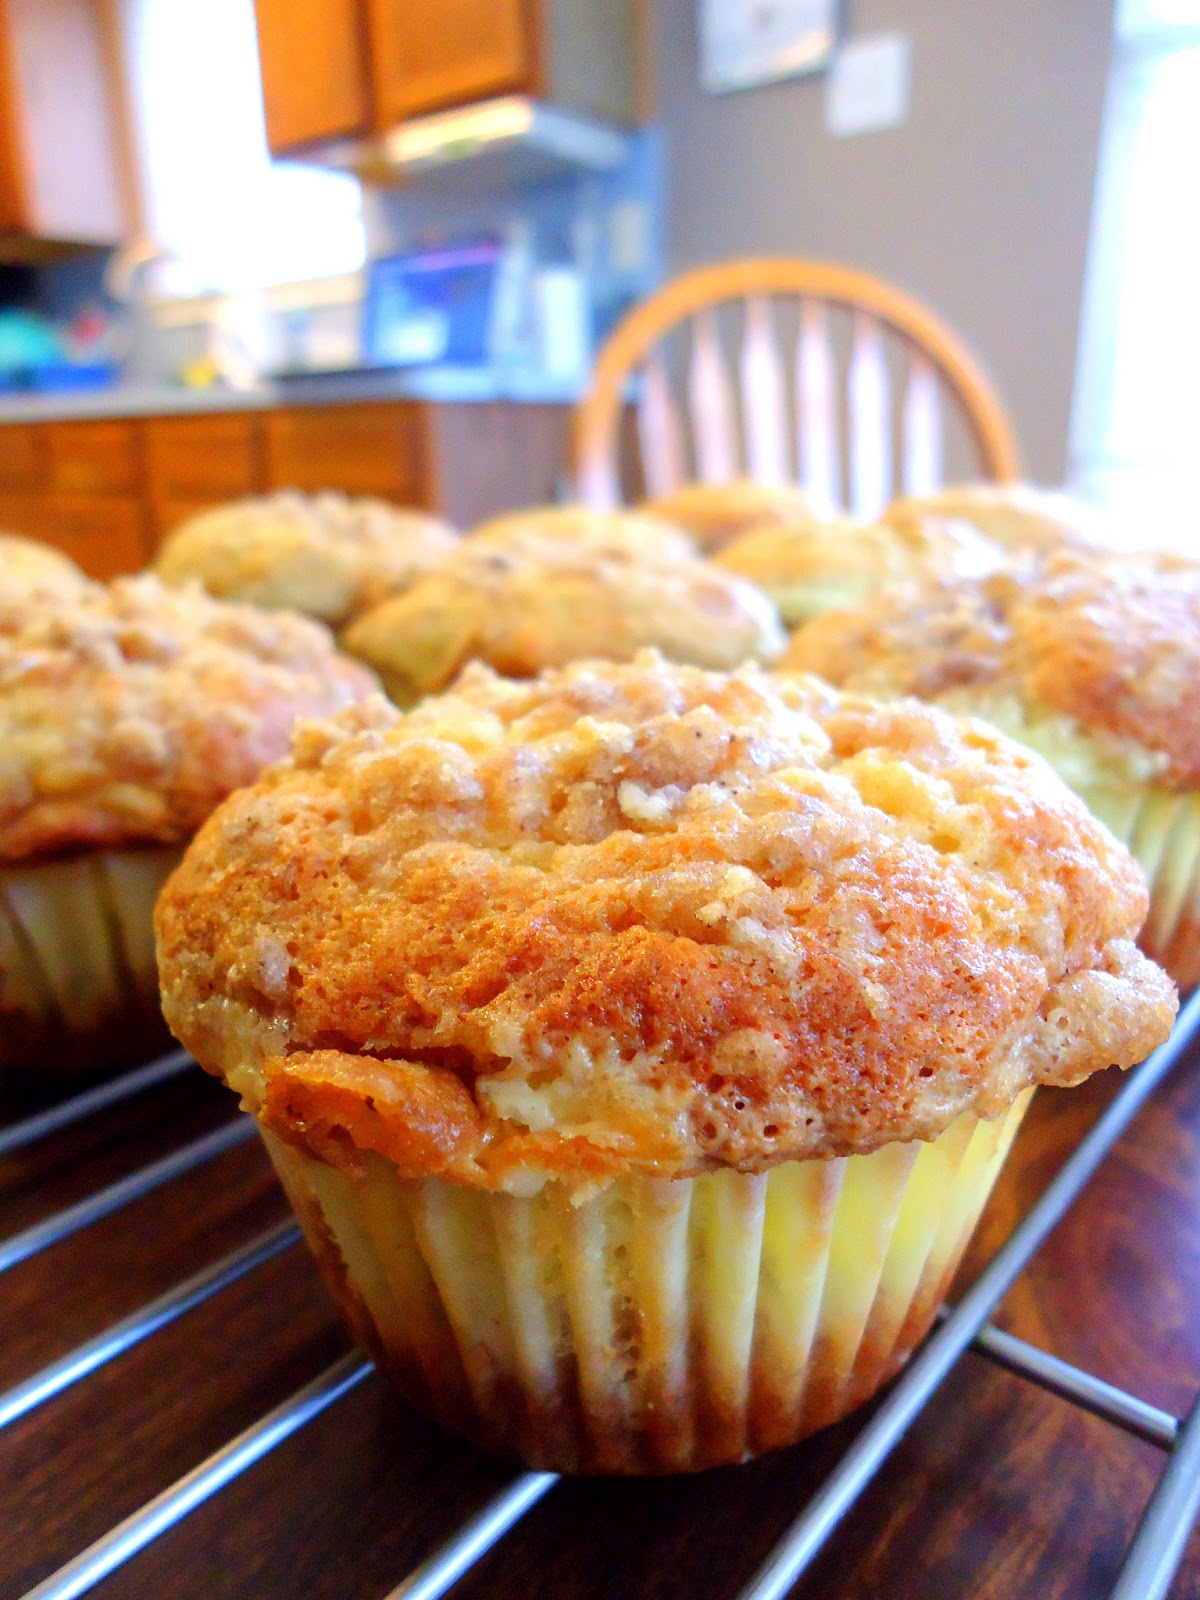 Foodie &amp; Fabulous: Banana Cream Cheese Muffins with Streusel Topping